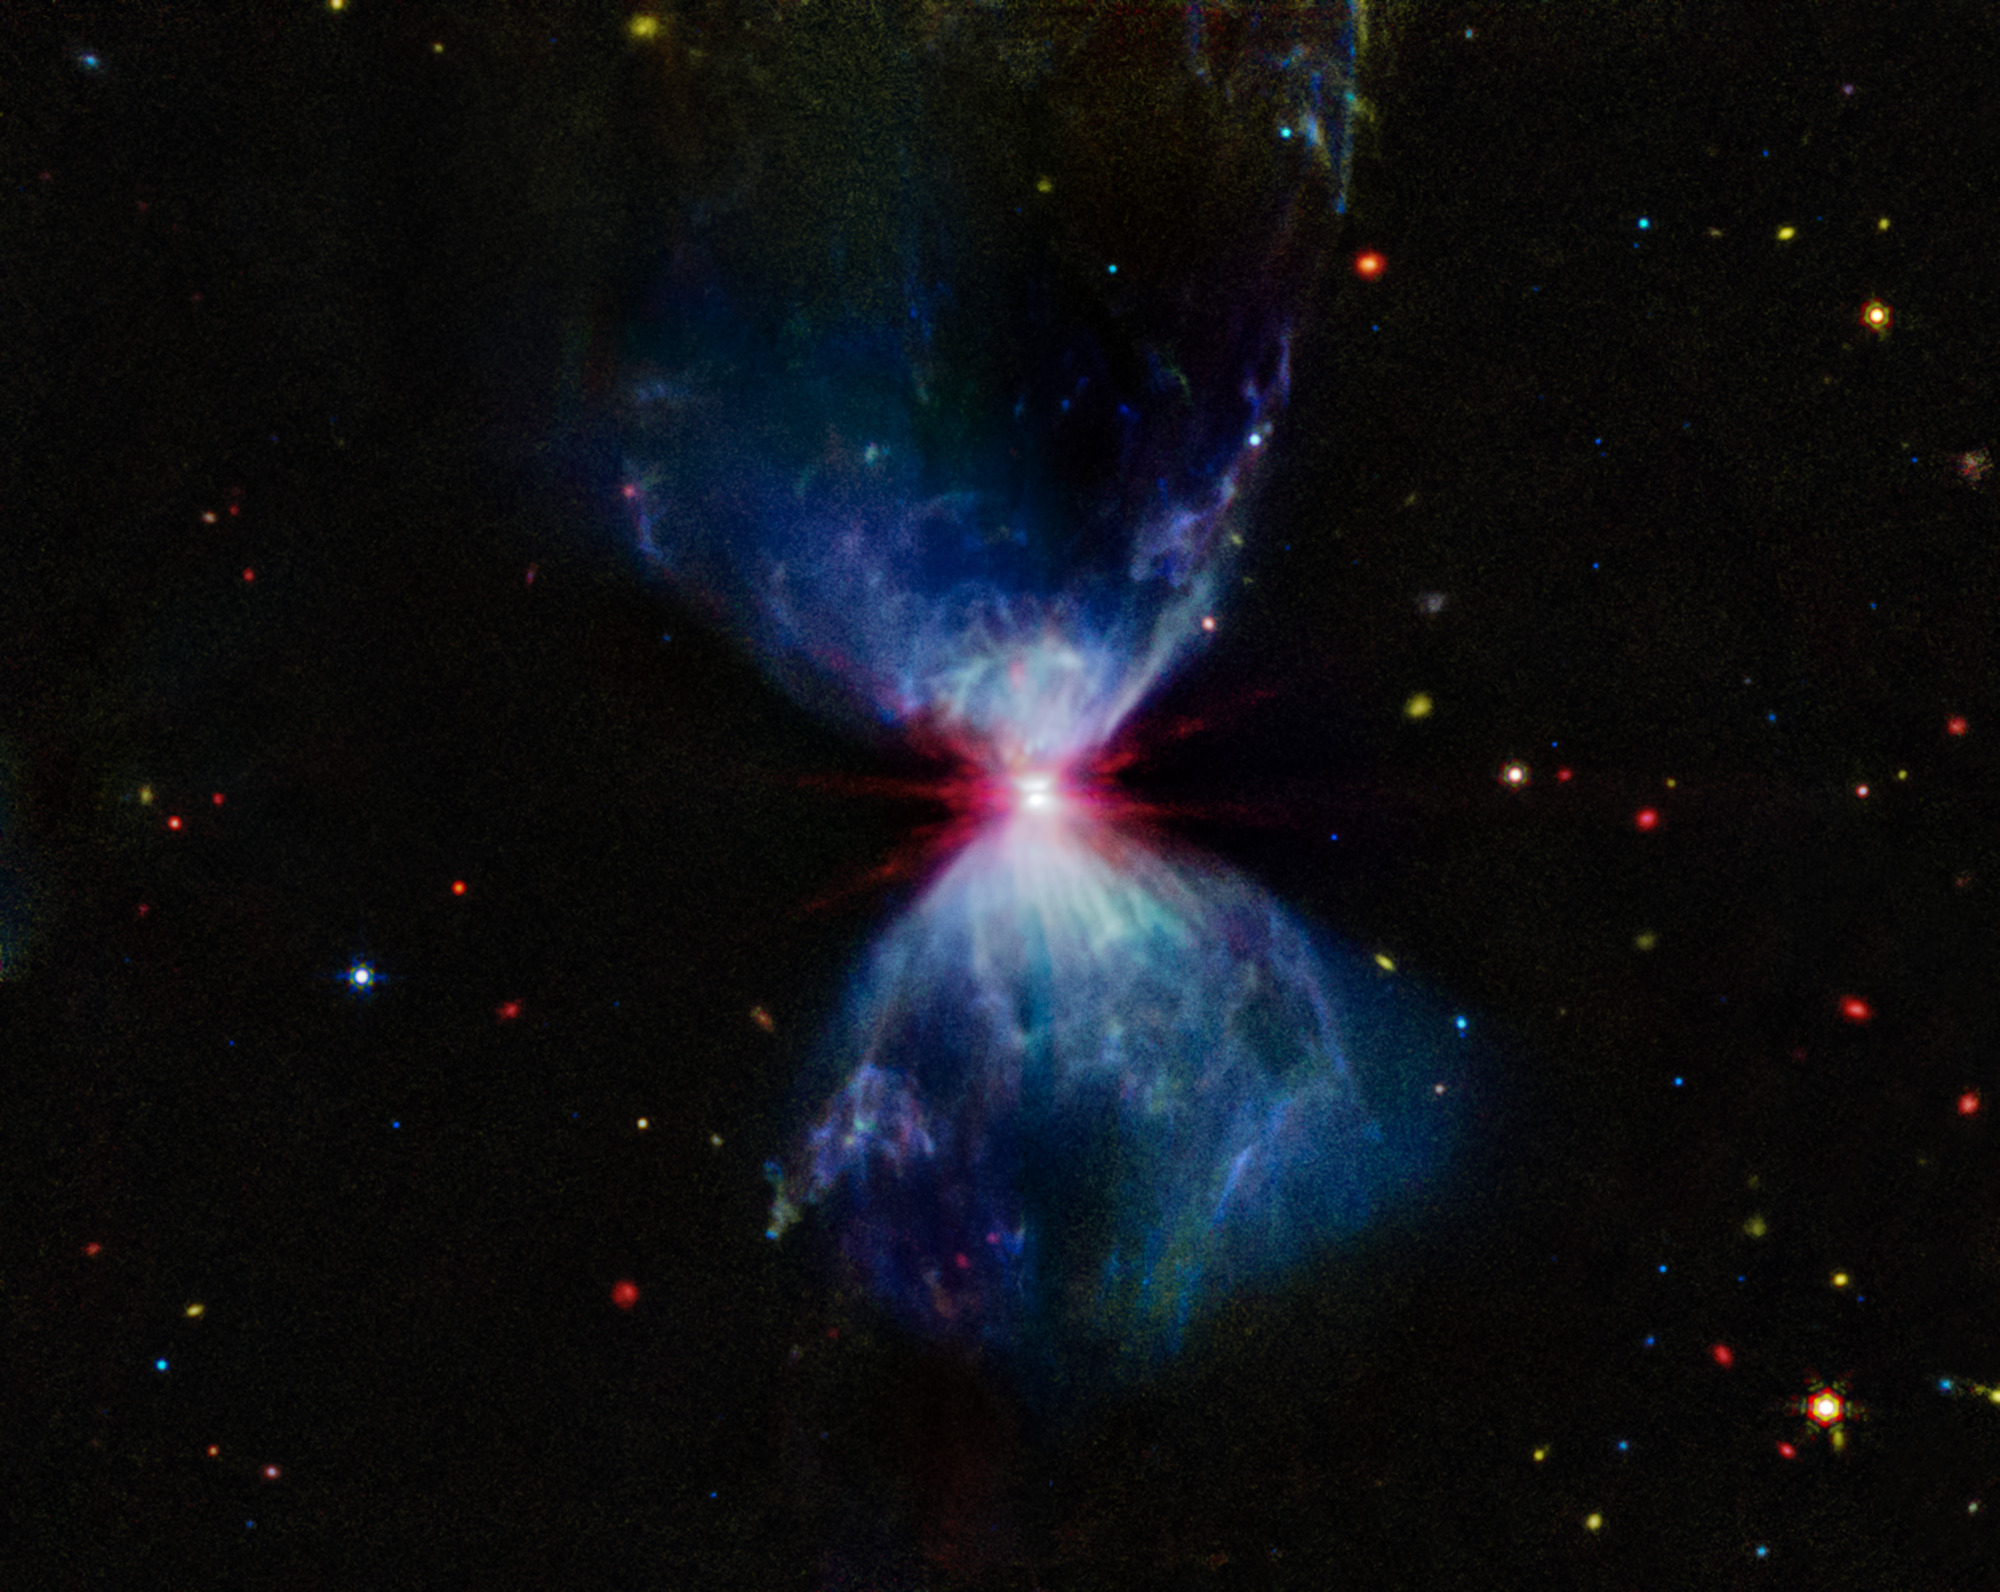 L1527, shown in this image from NASA’s James Webb Space Telescope’s MIRI (Mid-Infrared Instrument), is a molecular cloud that harbors a protostar. It resides about 460 light-years from Earth in the constellation Taurus. The more diffuse blue light and the filamentary structures in the image come from organic compounds known as polycyclic aromatic hydrocarbons (PAHs), while the red at the center of this image is an energized, thick layer of gases and dust that surrounds the protostar. The region in between, which shows up in white, is a mixture of PAHs, ionized gas, and other molecules.